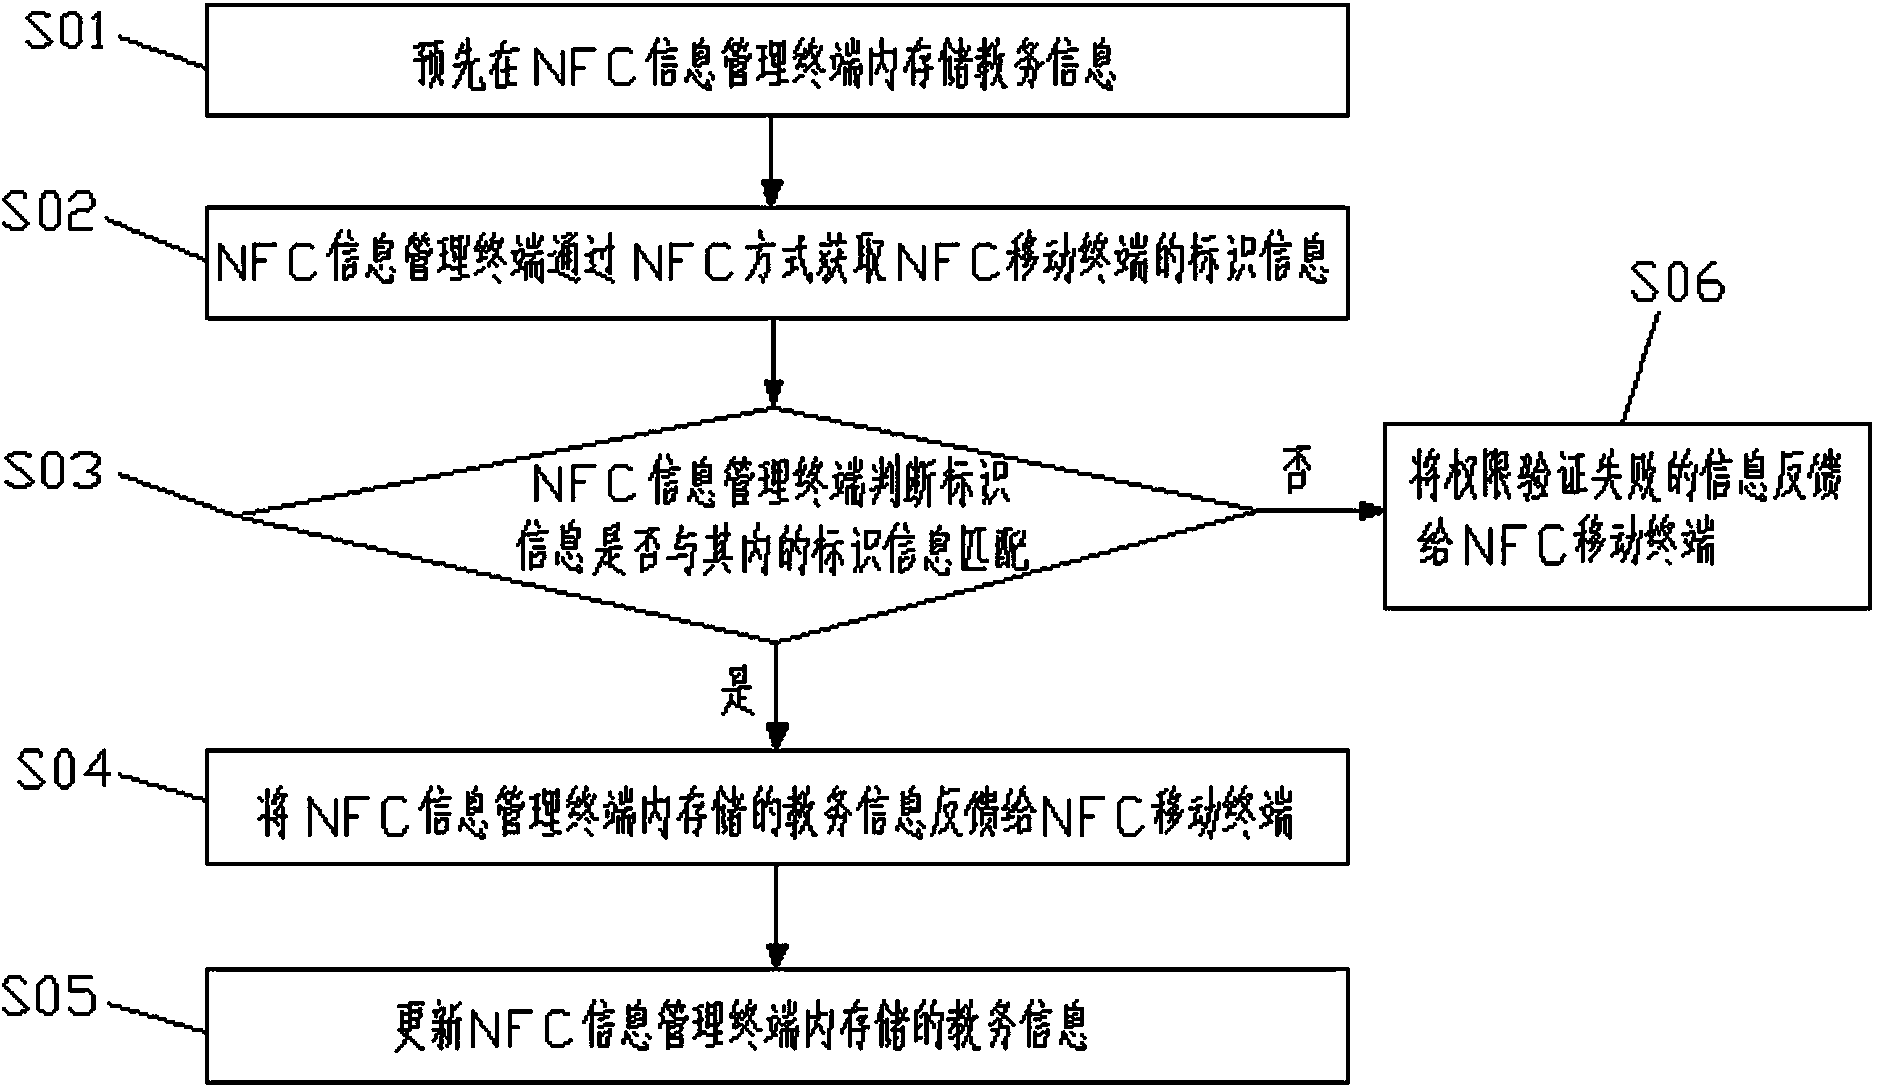 Educational administration information view method based on NFC